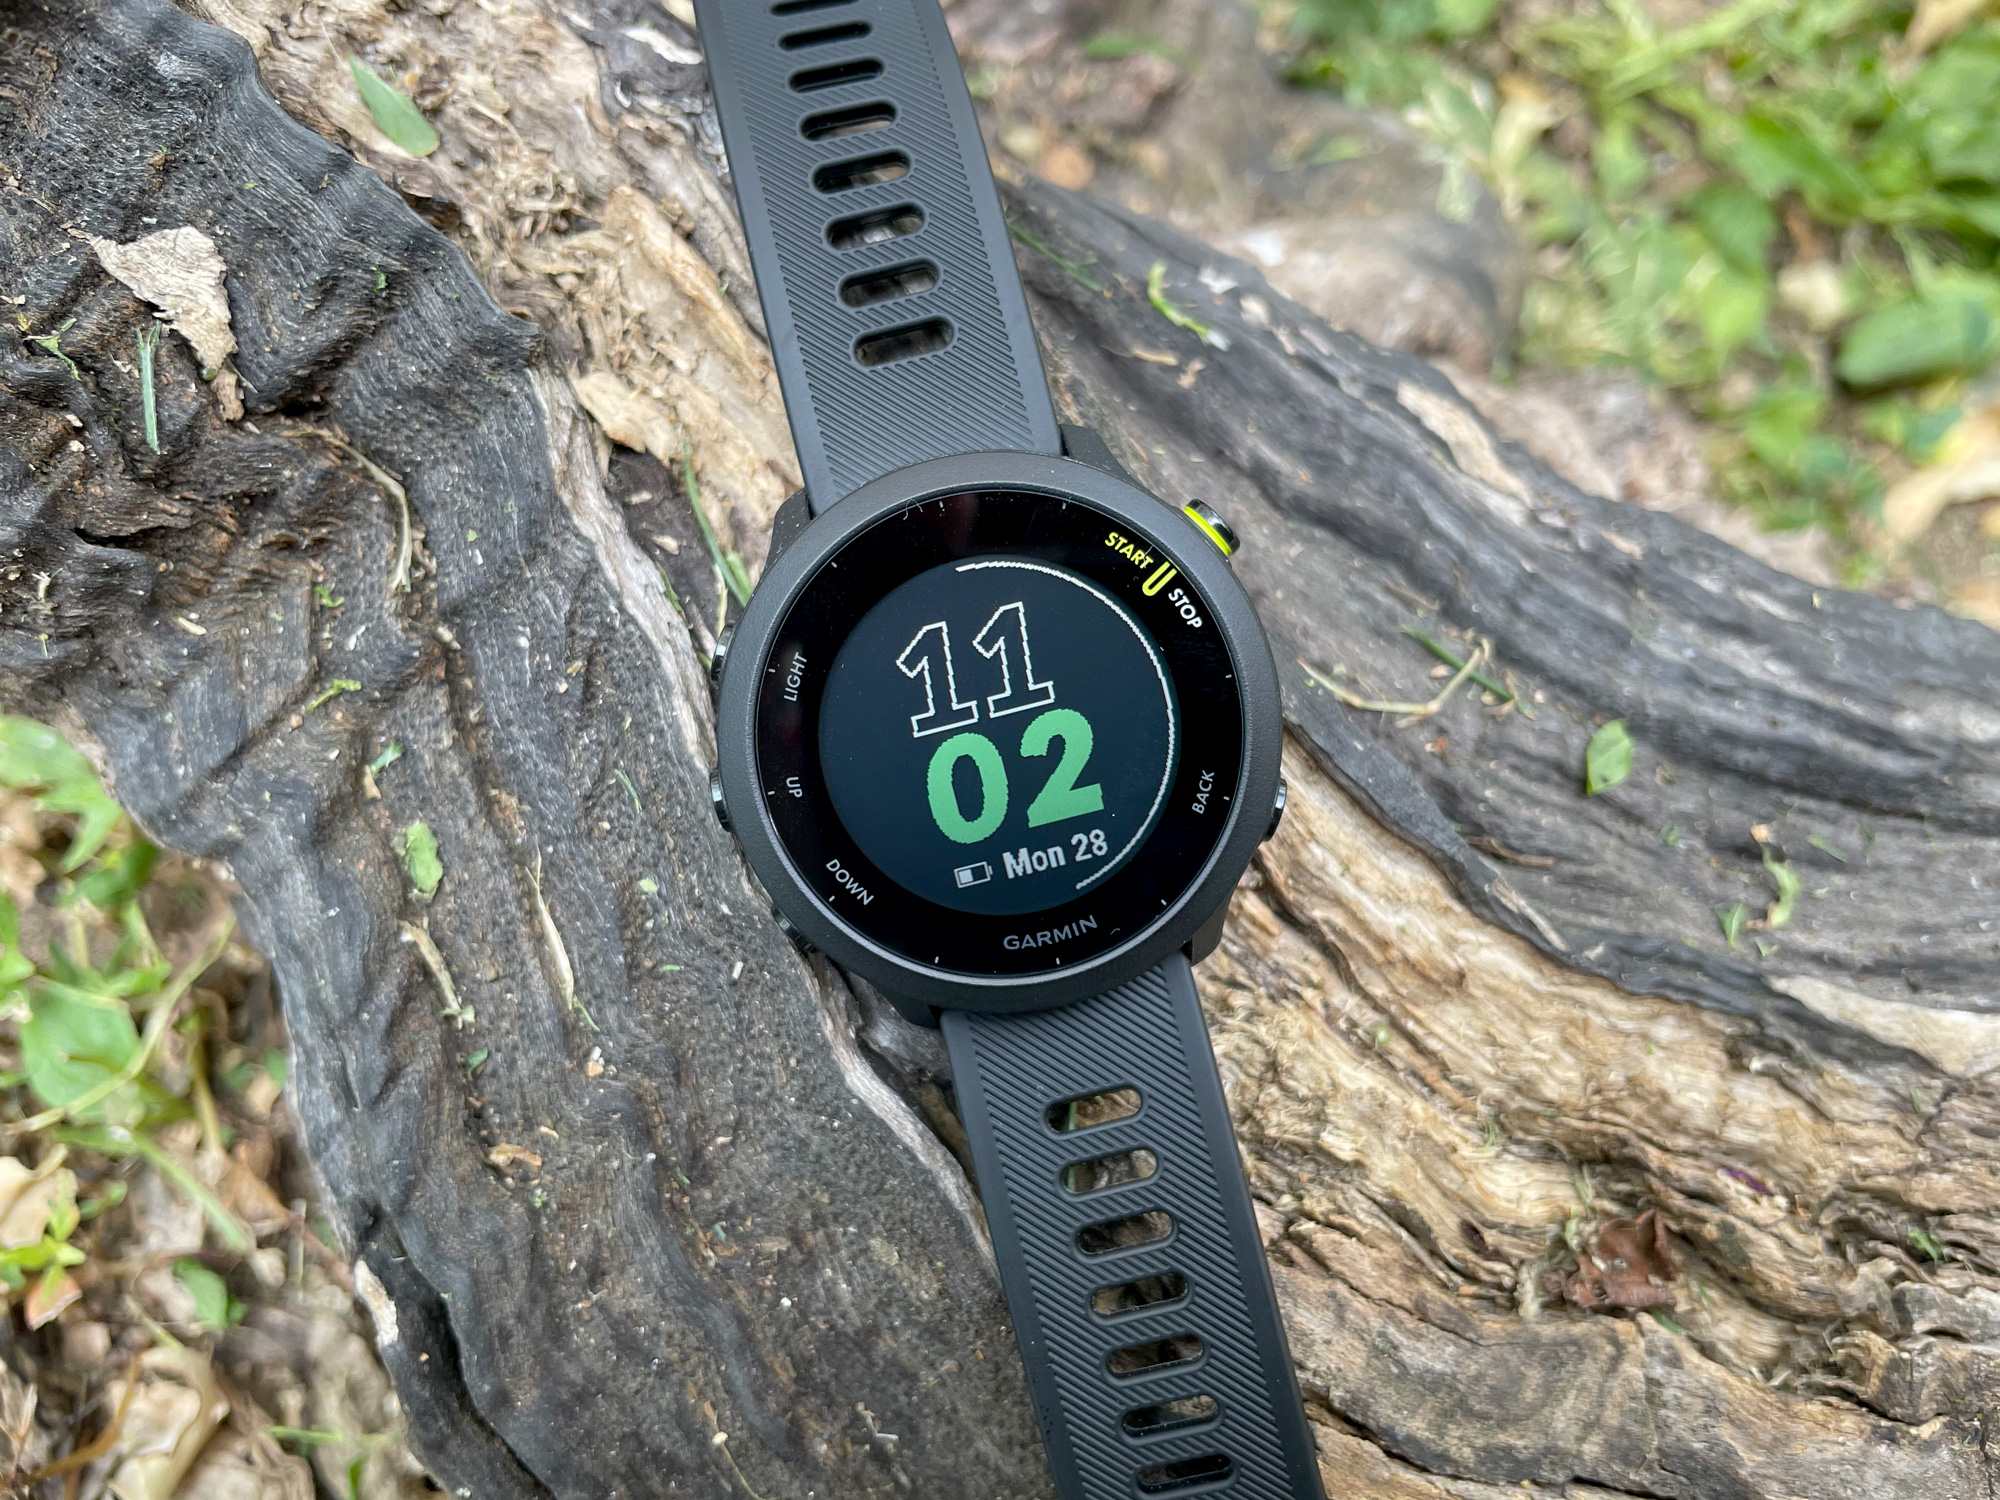 Garmin Forerunner 55 review: A budget fitness tracker that doesn’t skimp on features